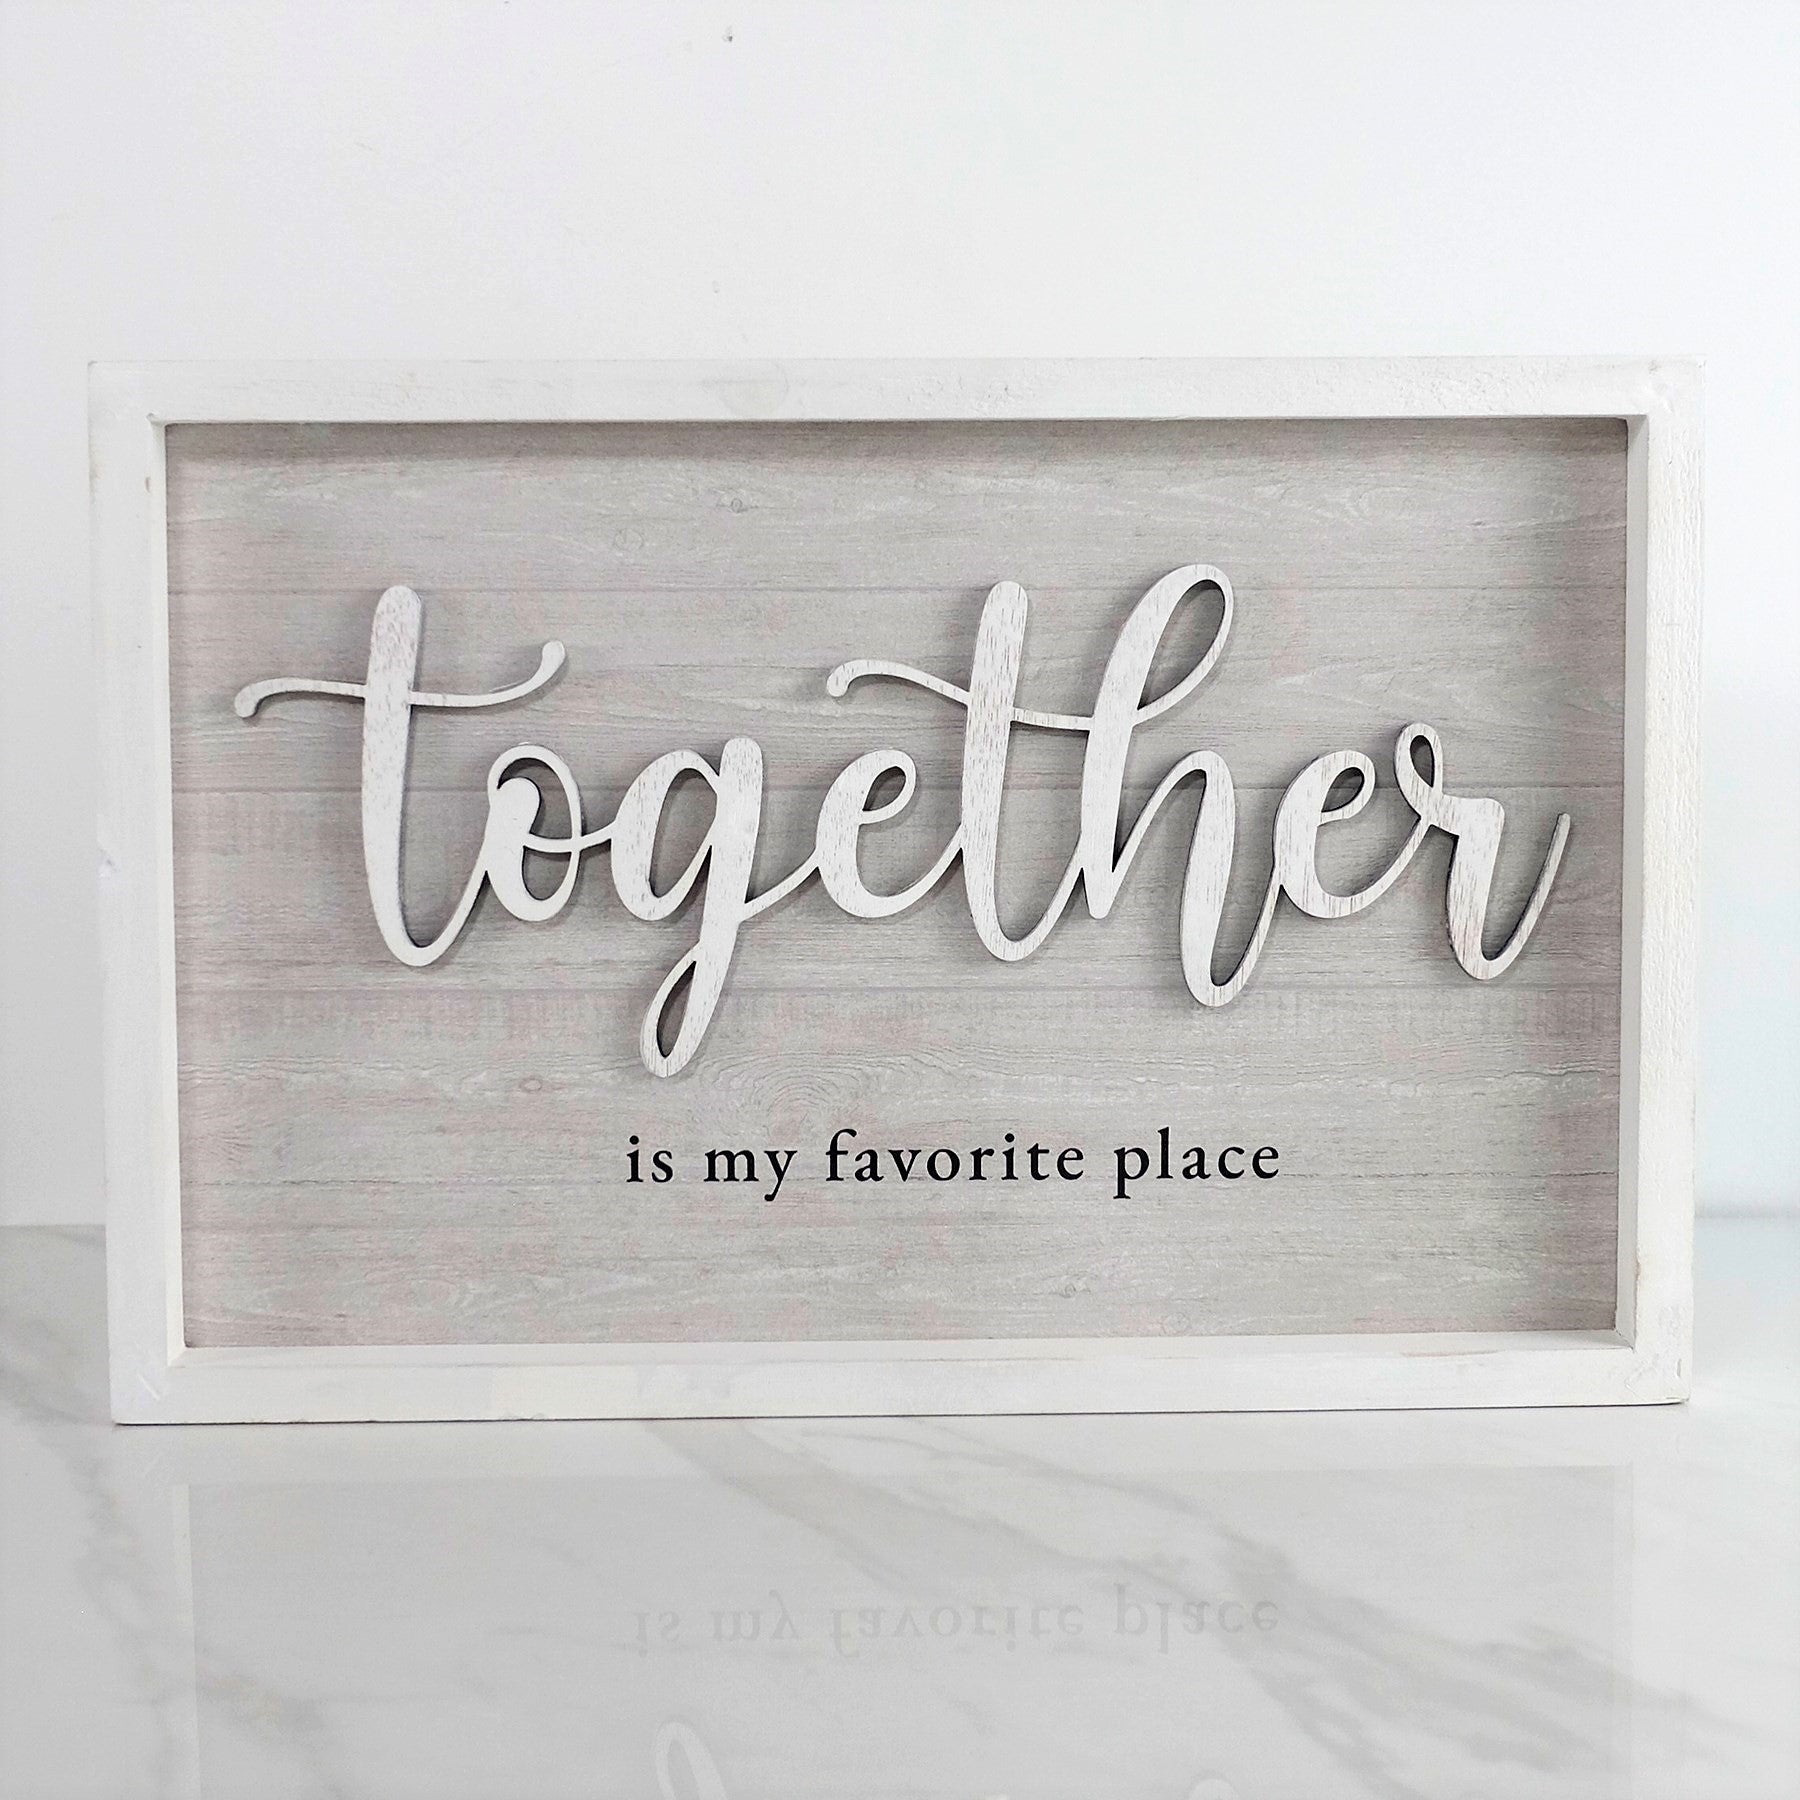 Together Is My Favorite Place Frame 6"x4"